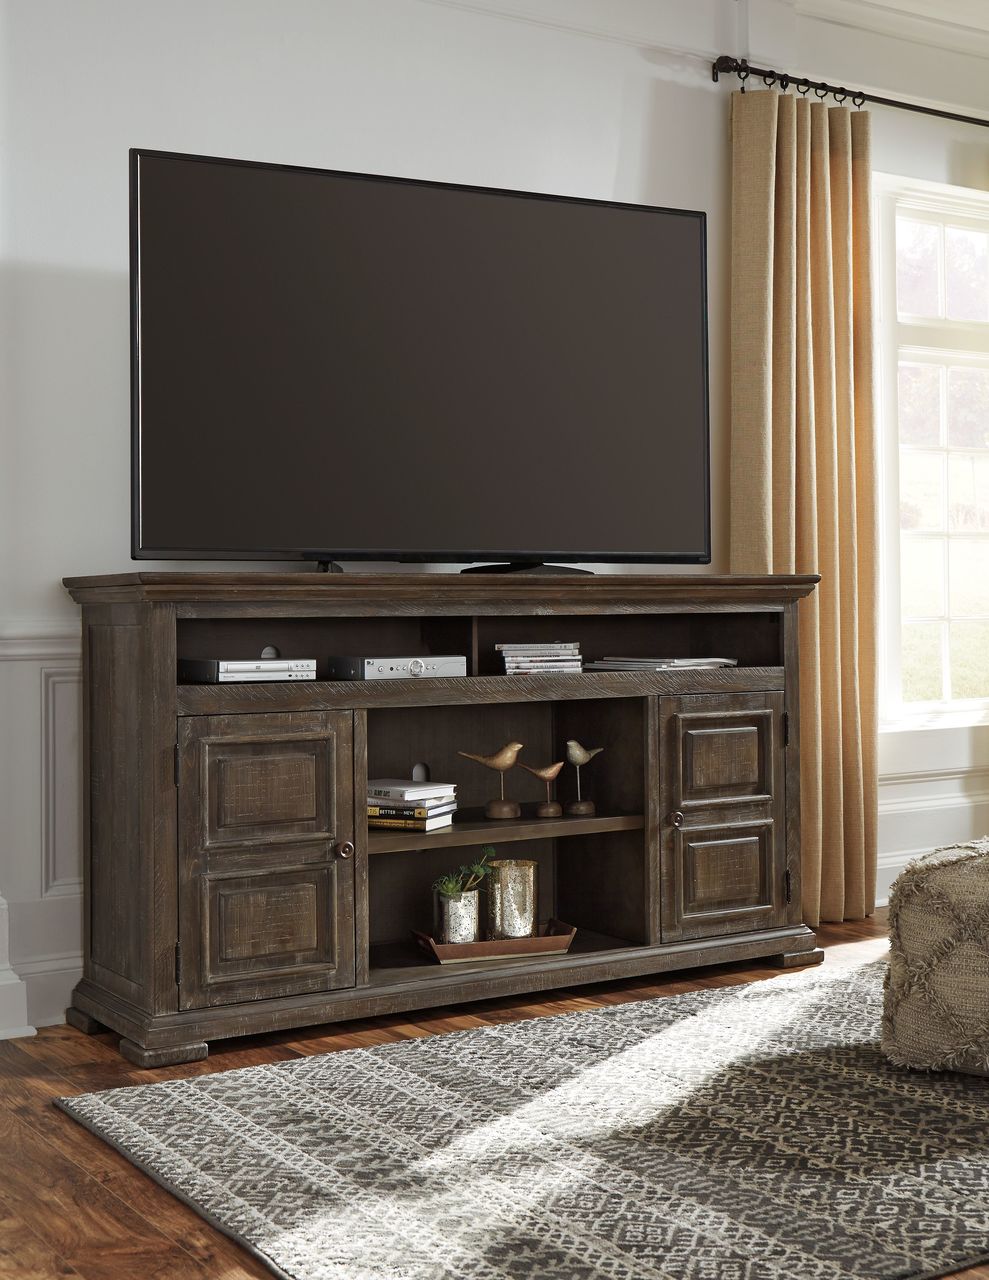 Ashley Fireplace Tv Stand Lovely ashley Wyndahl Rustic Brown Xl Tv Stand W Fireplace Option